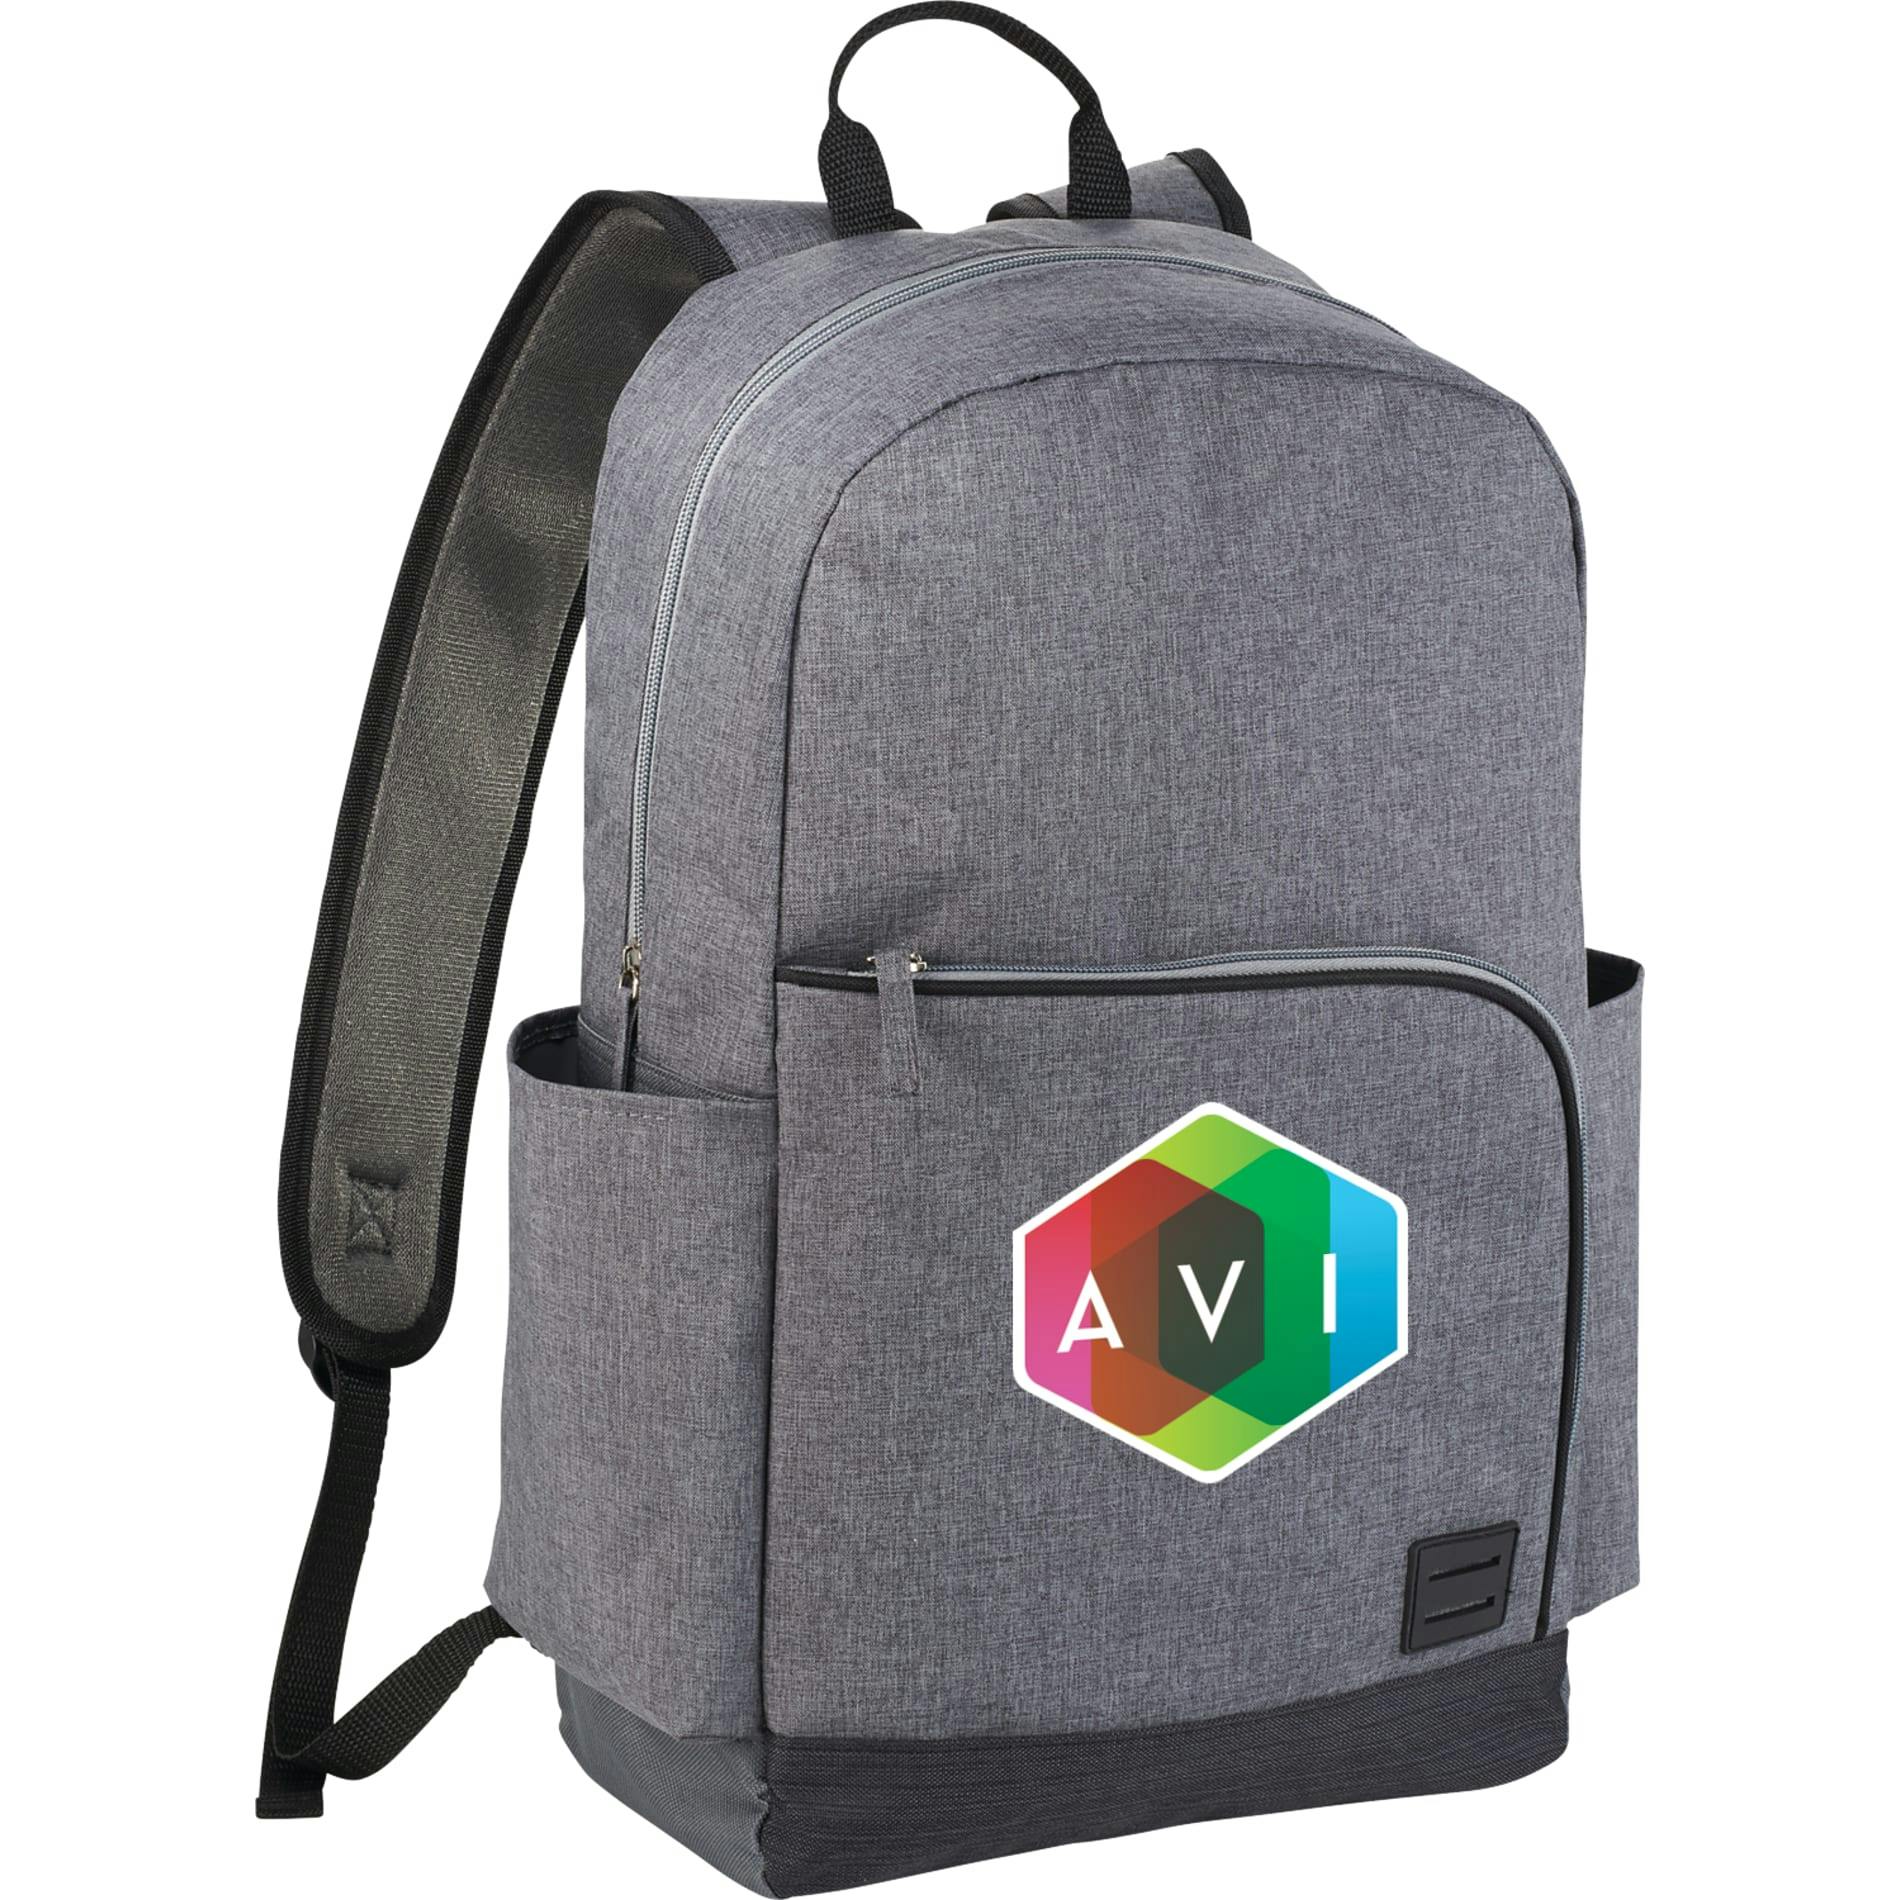 Grayson 15" Computer Backpack - additional Image 3